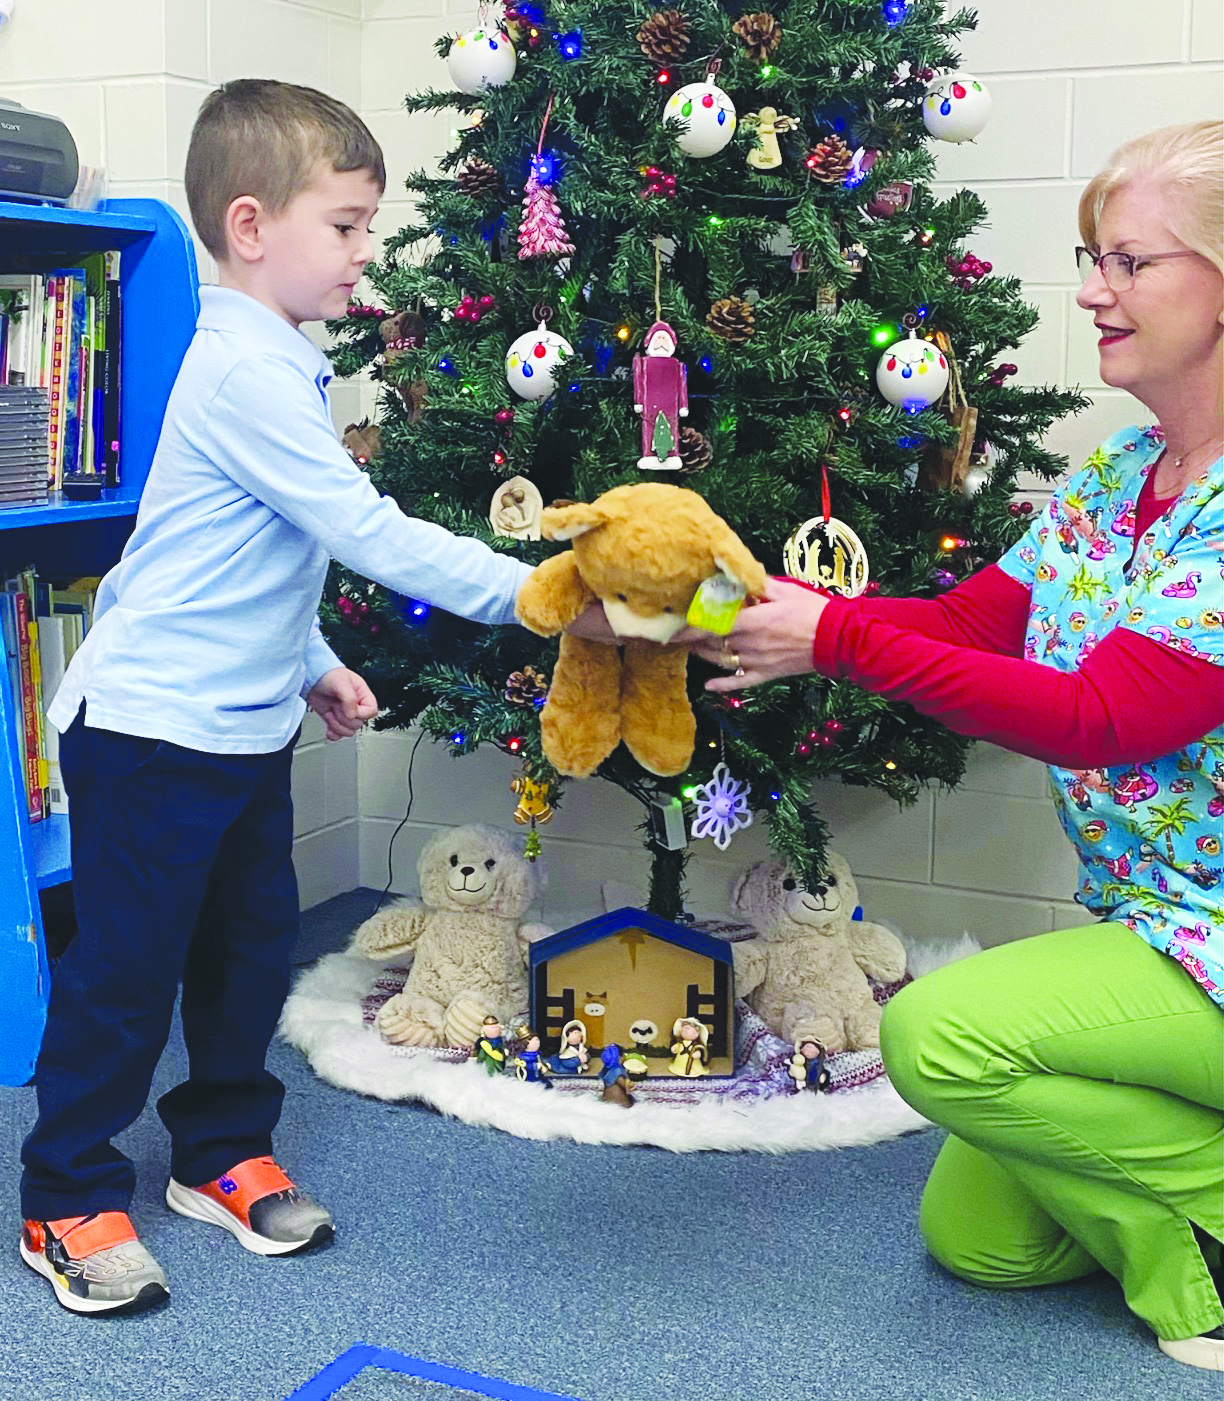 Cheerful Giving Holy Family Early Childhood Classrooms Bring Joy to Community